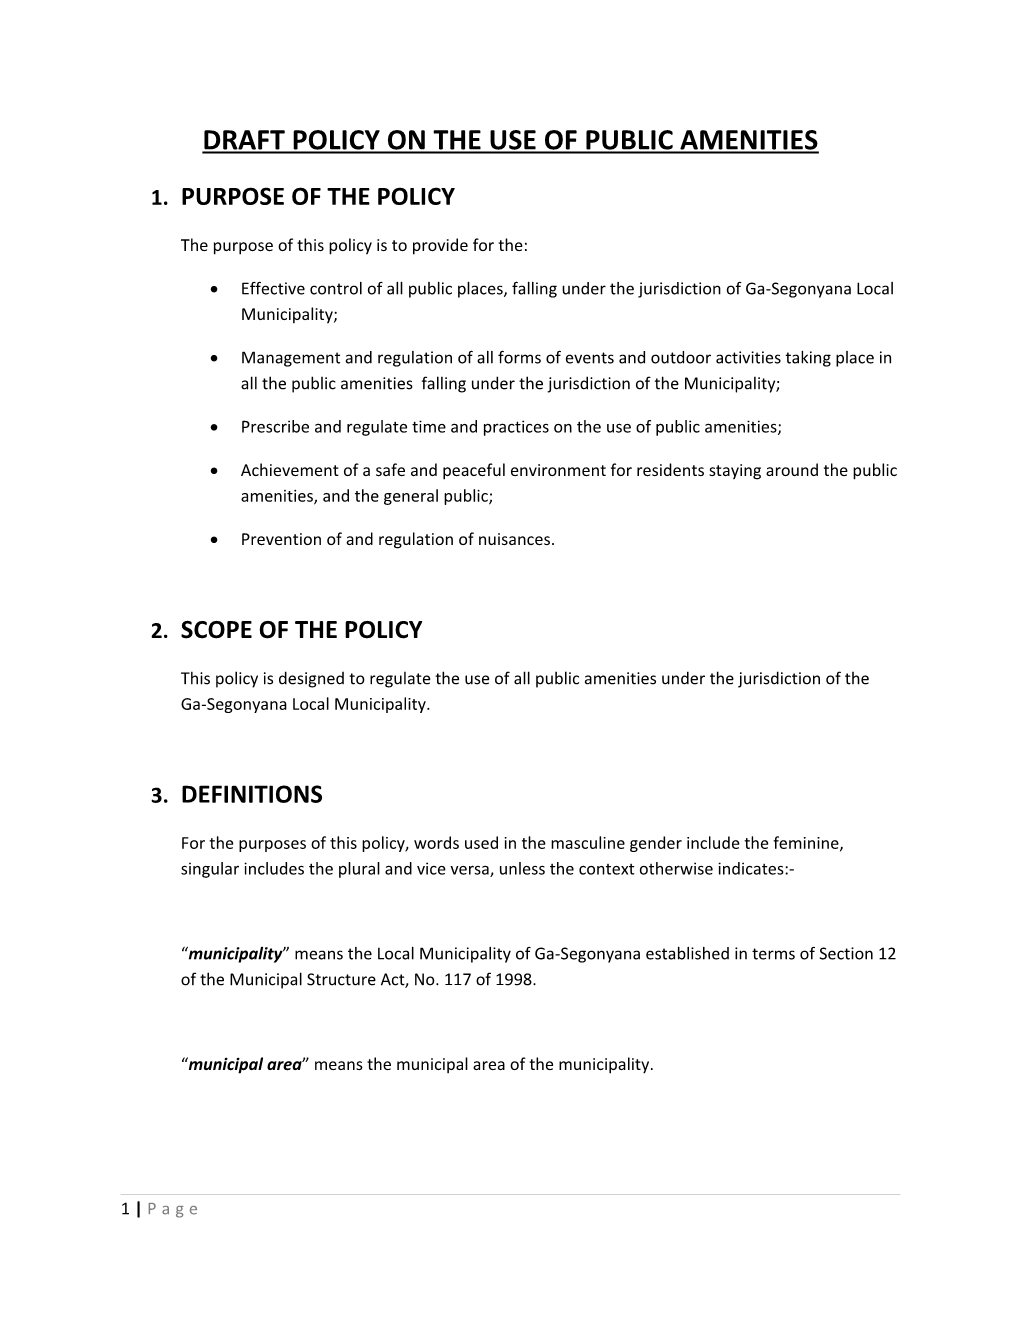 Draft Policy on the Use of Public Amenities